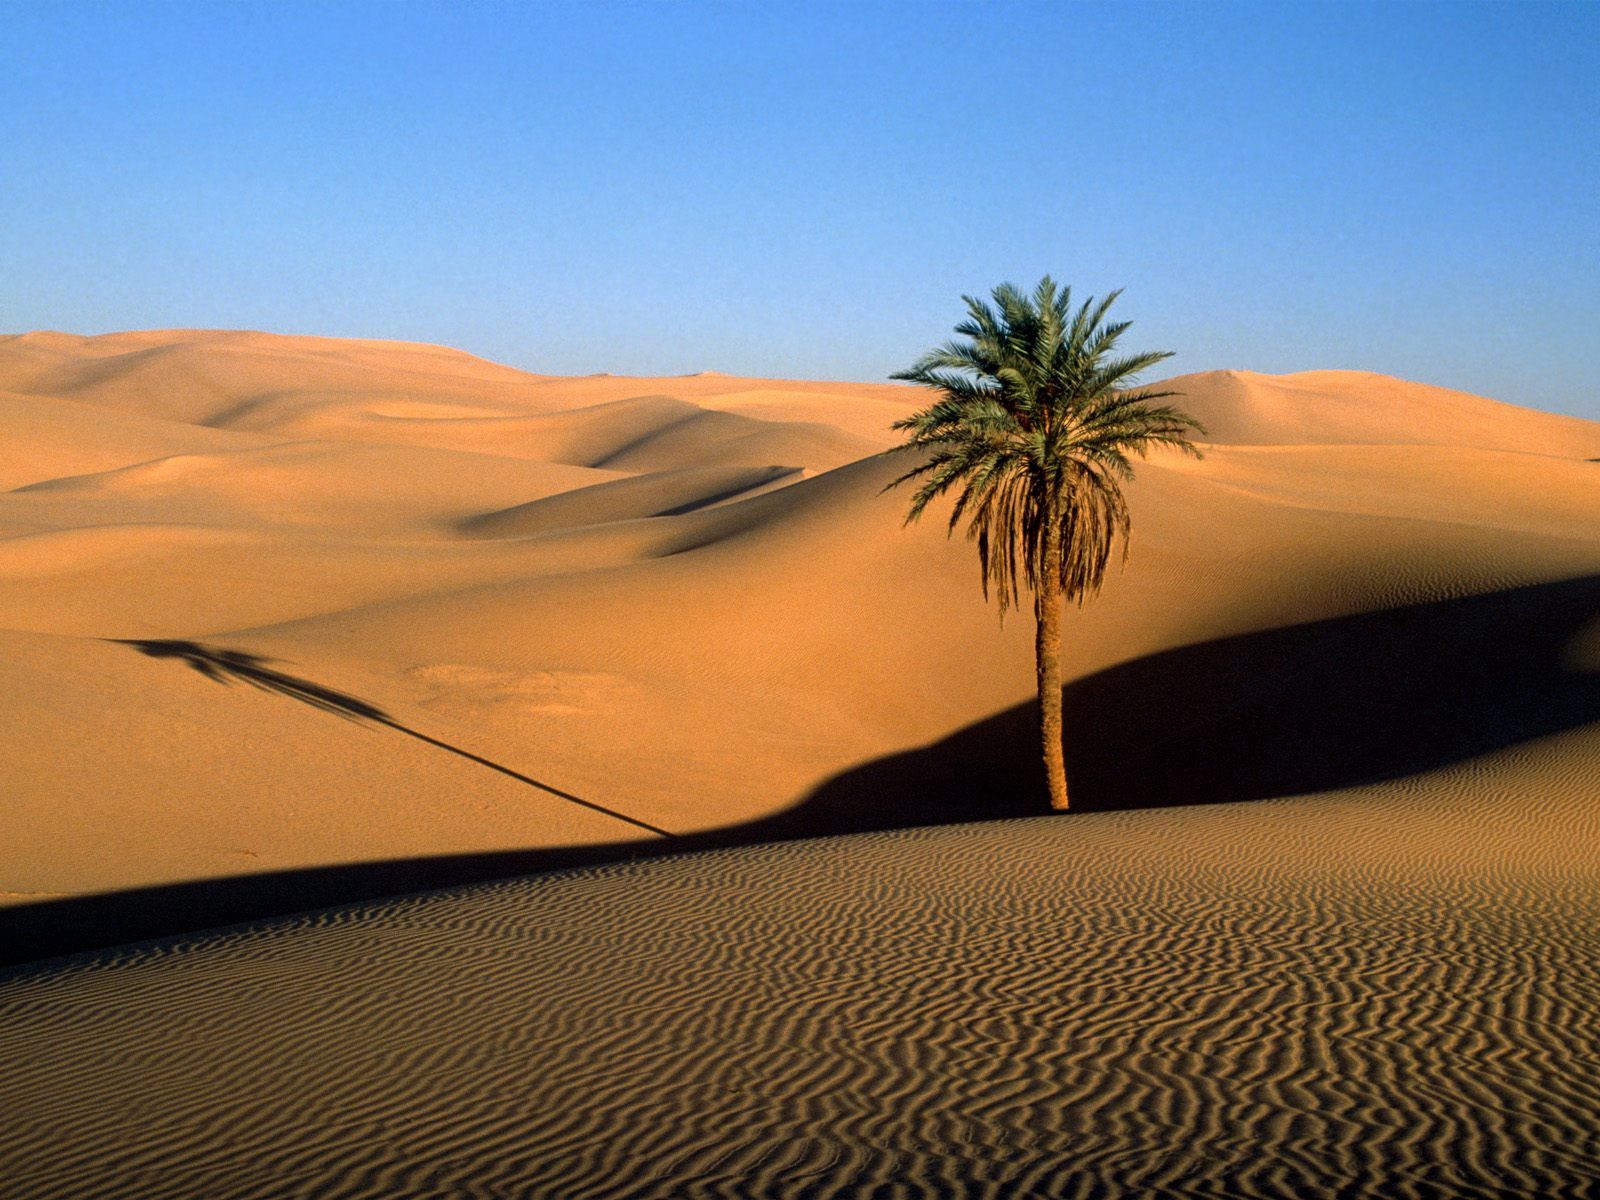 141223 download wallpaper desert, nature, sand, wood, tree, palm, shadow, evening, dunes, links screensavers and pictures for free